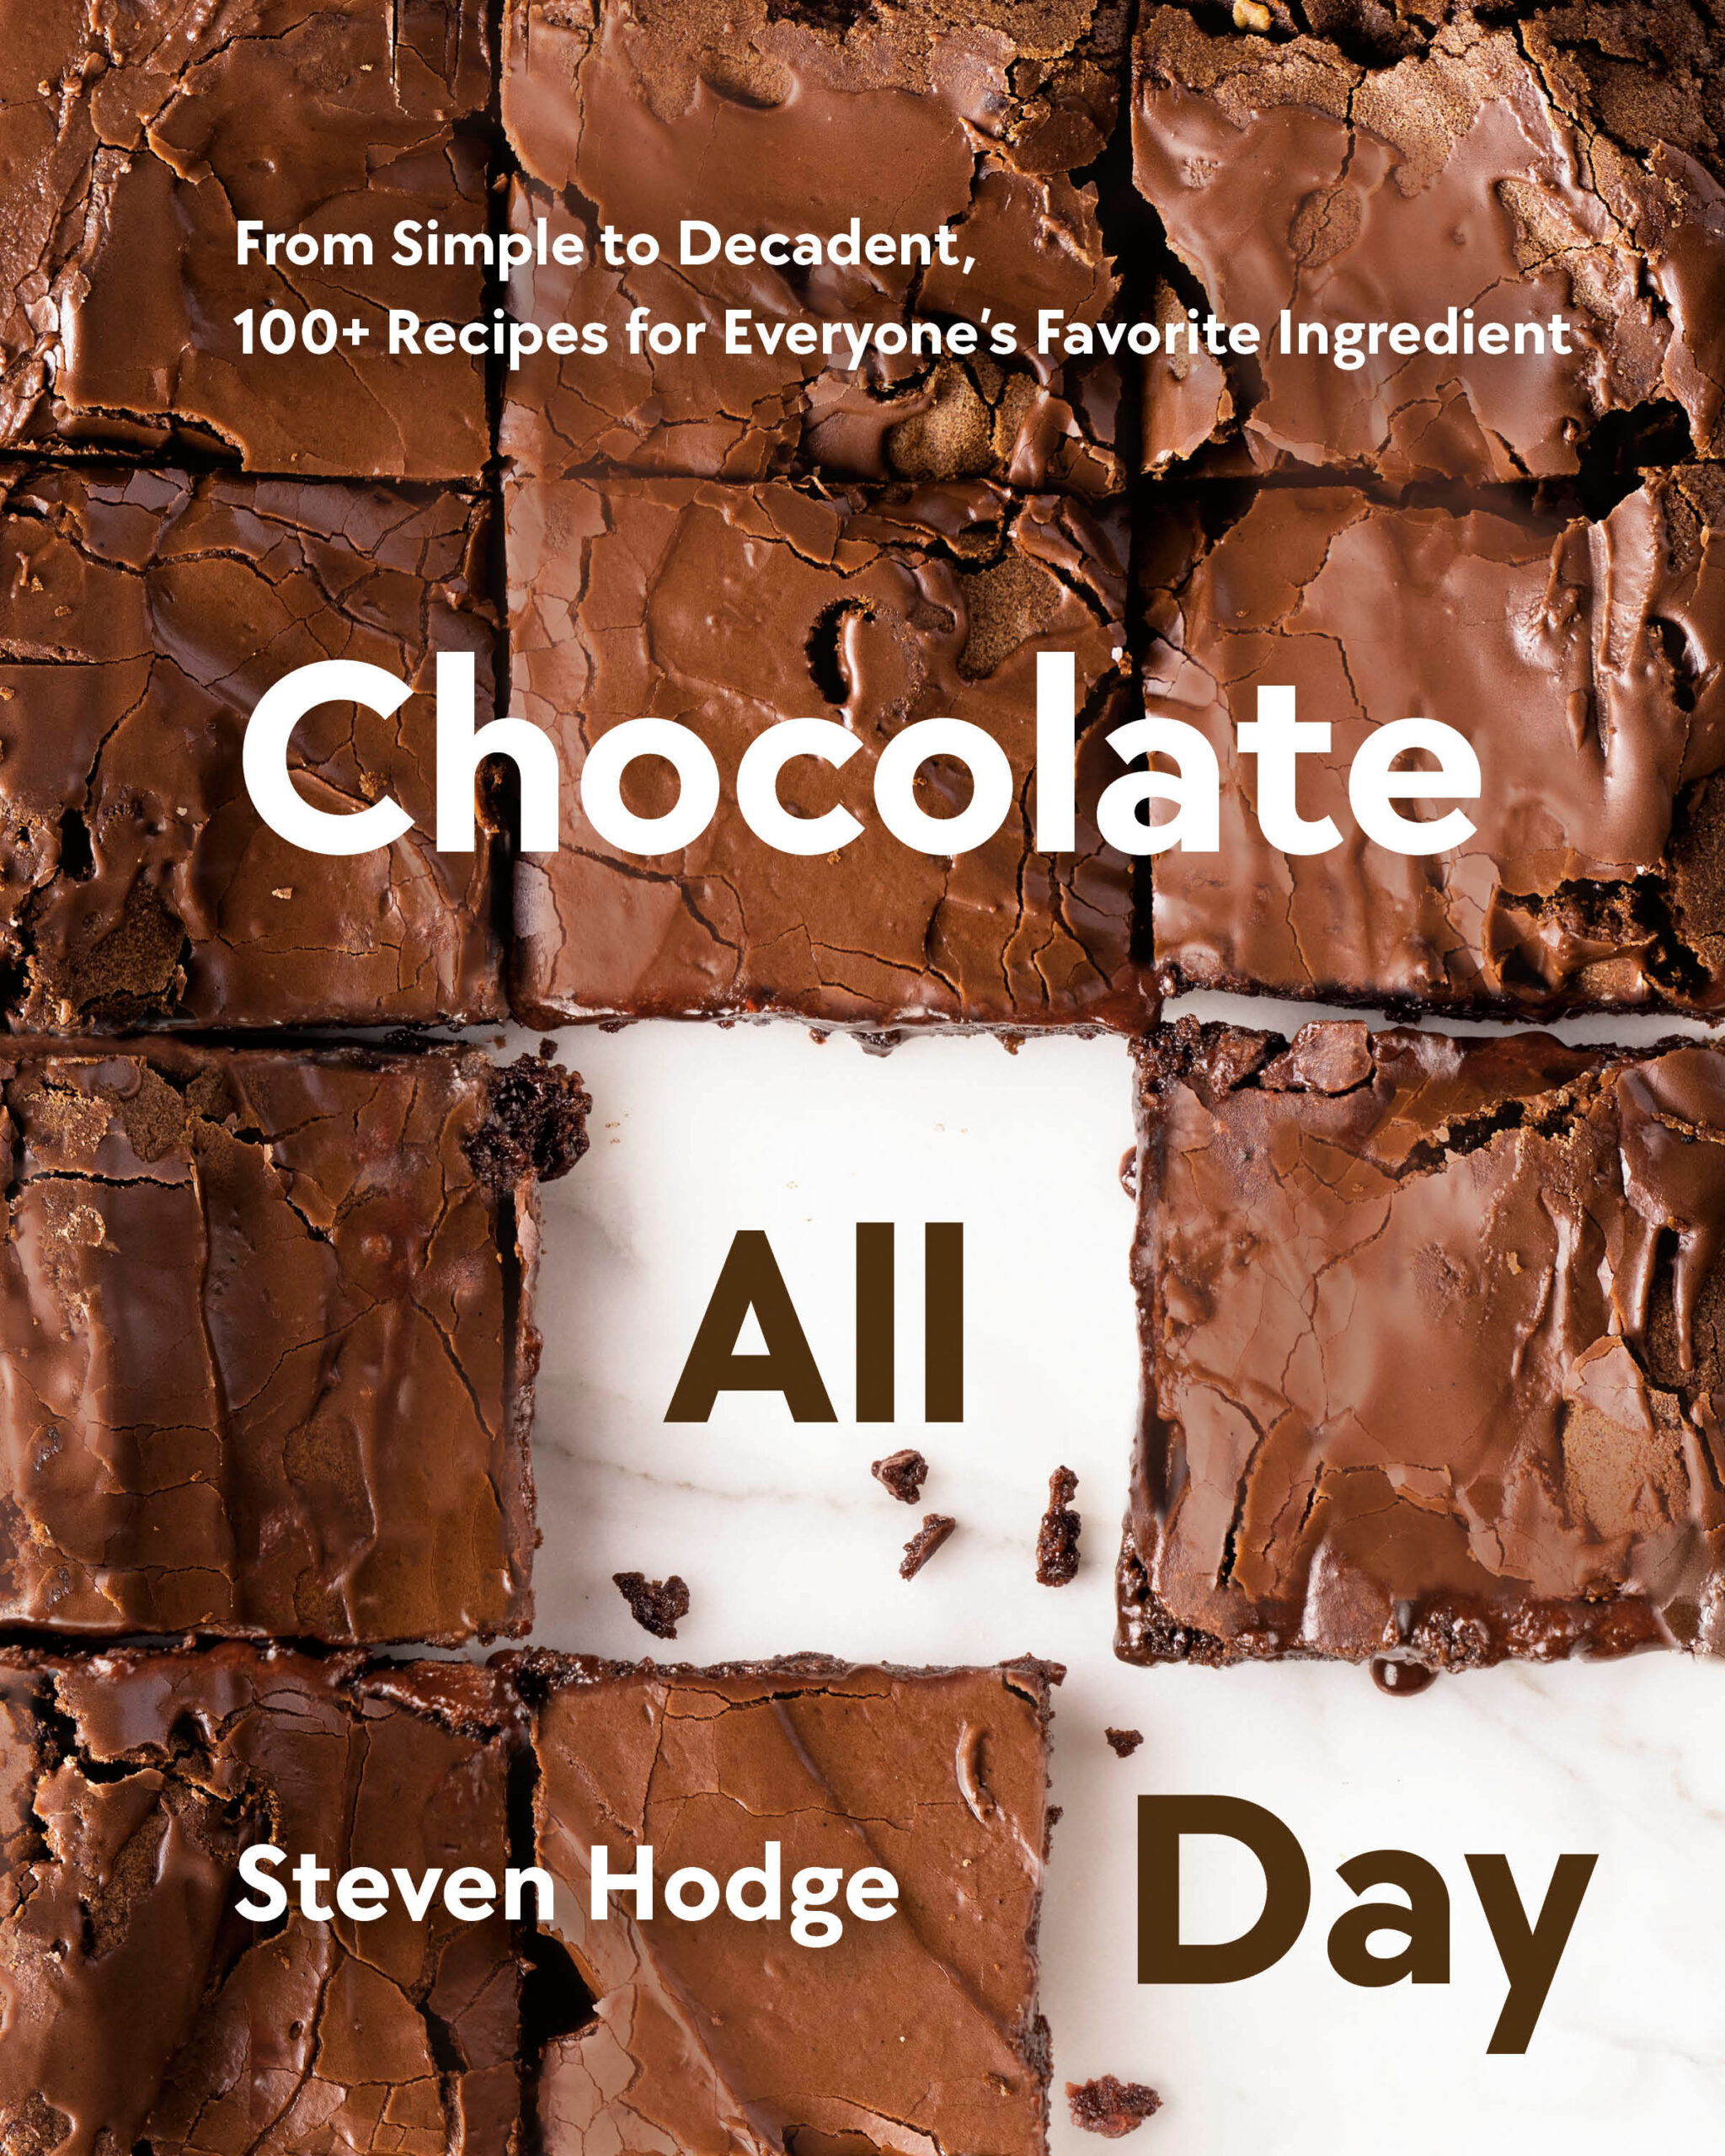 Book cover for Steven Hodge who provided the scones recipe